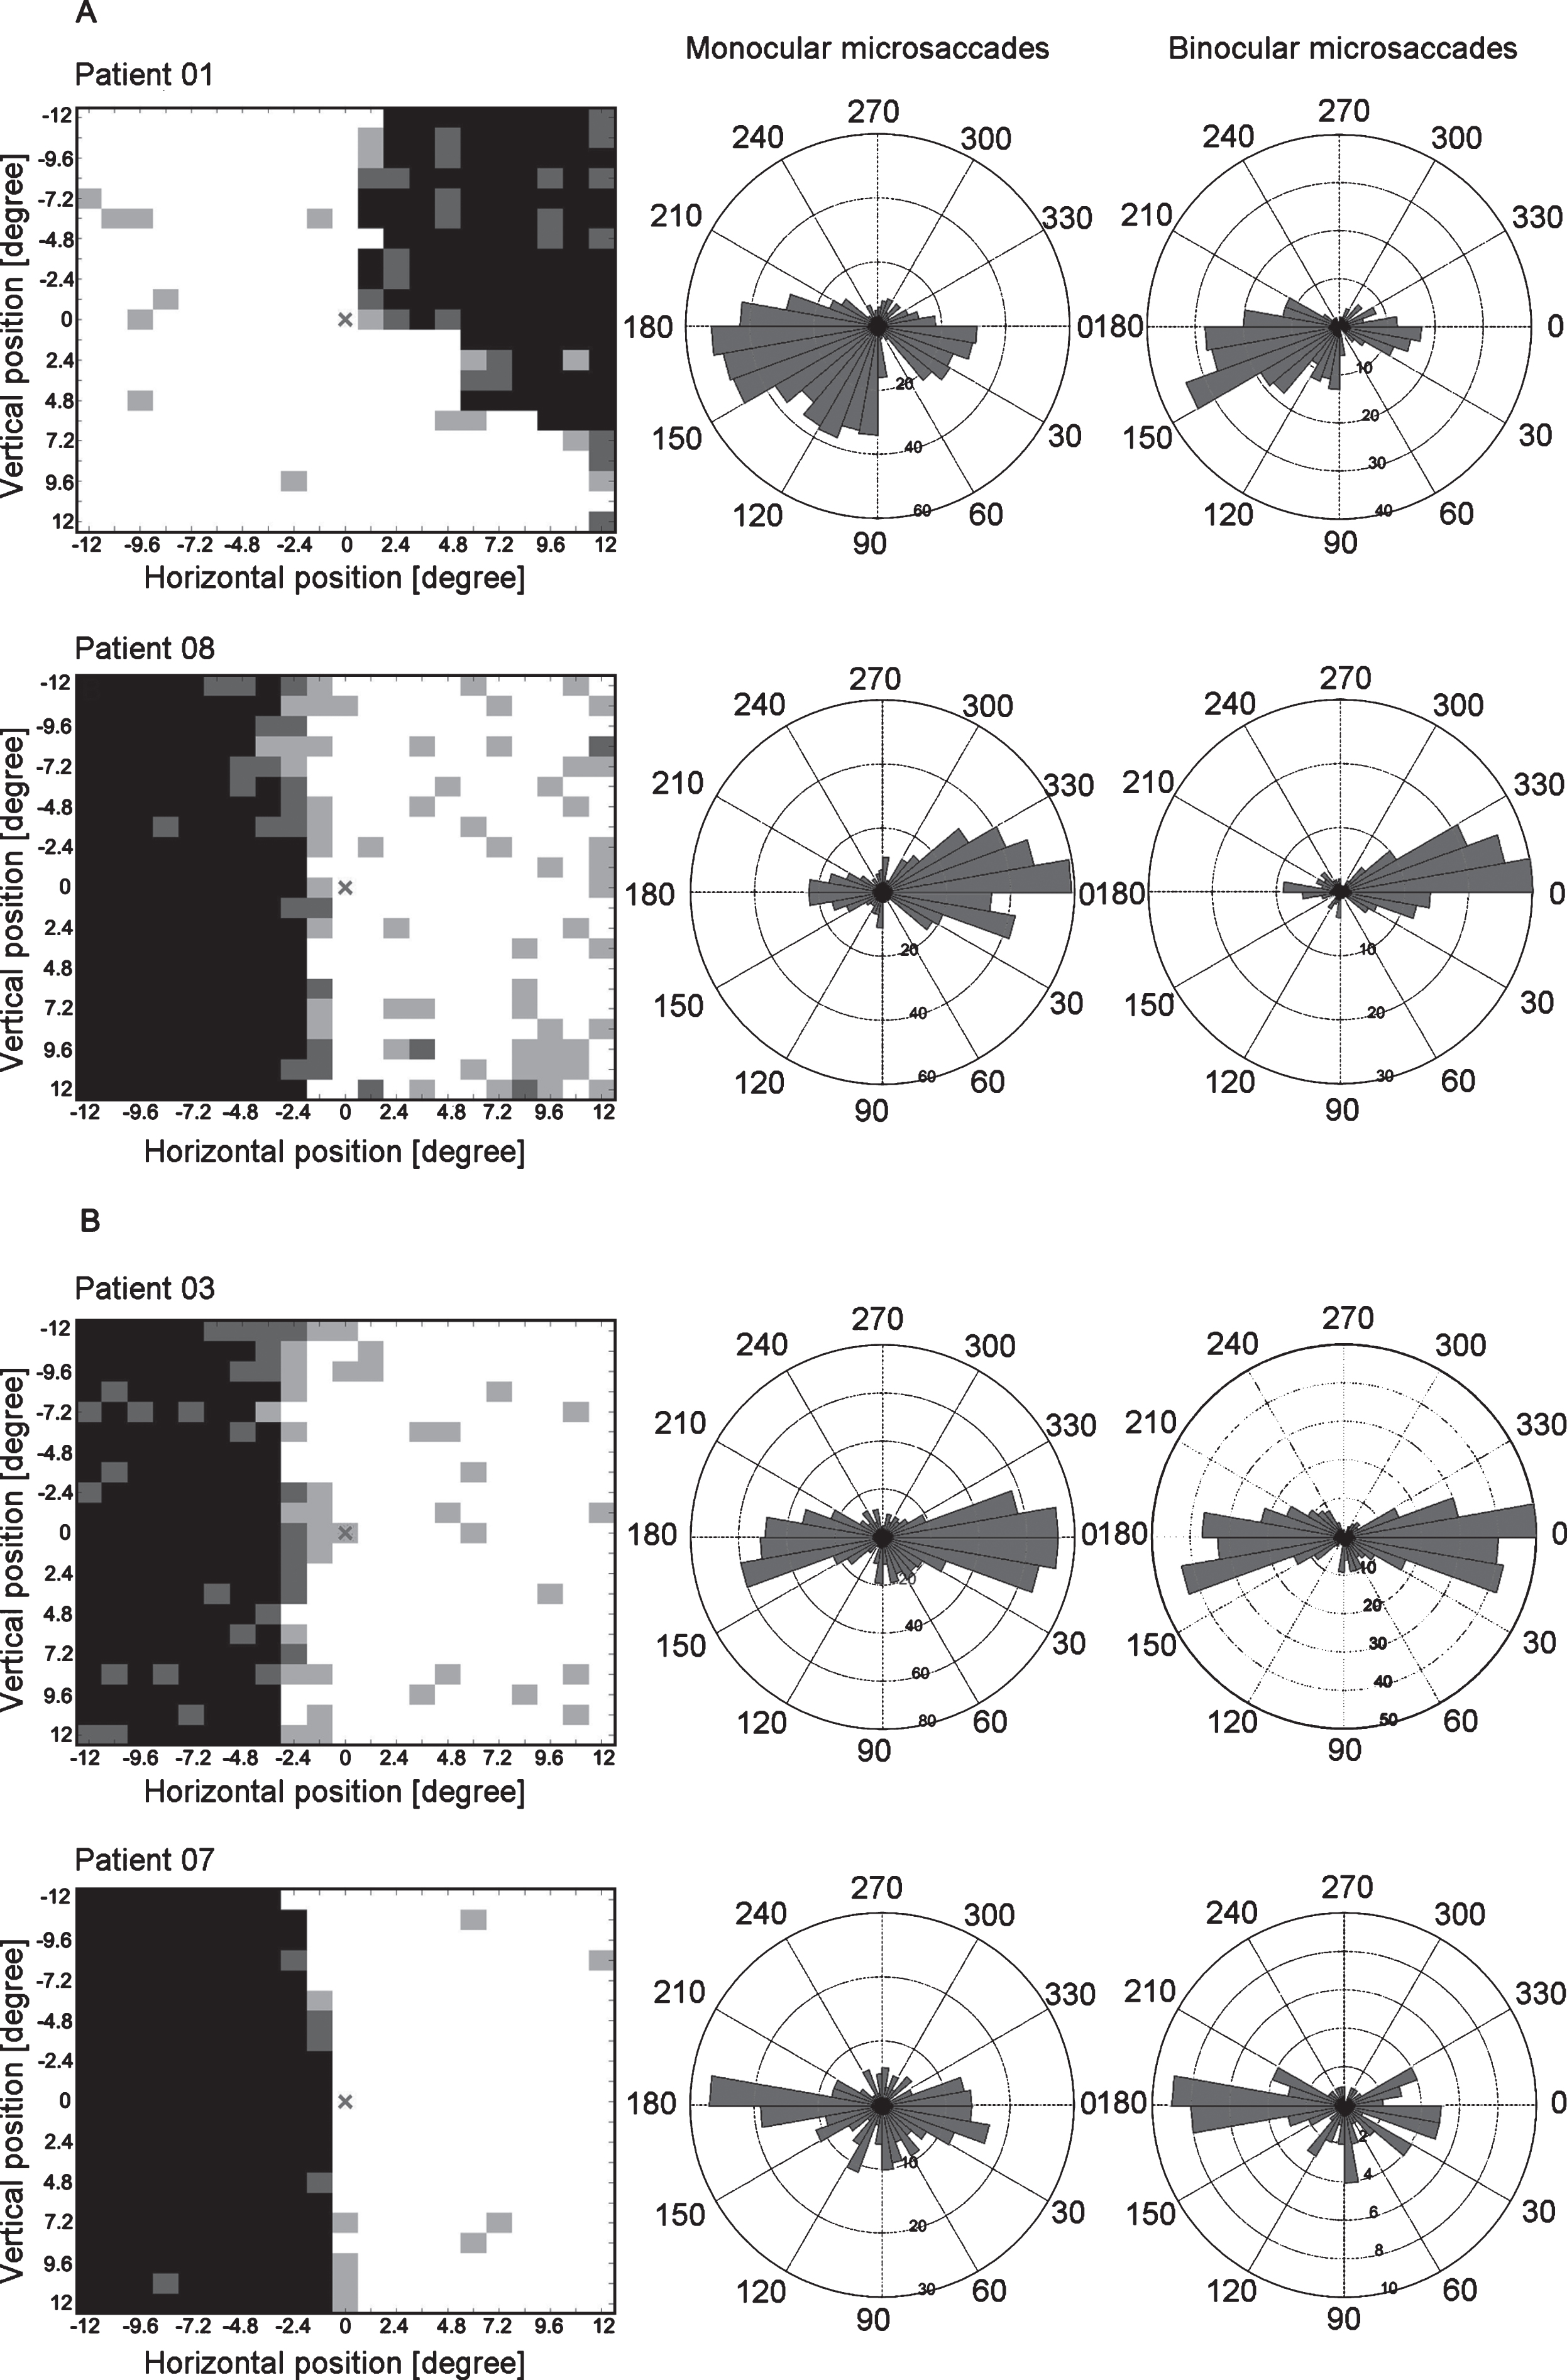 HRP visual charts, monocular and binocular microsaccade angular histograms of representative hemianopia cases of the biased (A) and the non-biased group (B). The HRP visual charts (first column) and angular histograms of monocular (second column) and binocular (third column) microsaccades from four patients with hemianopia (two in each subgroup) are presented. In the biased group, the angular histograms show more microsaccades towards the intact area. In the non-biased group, the angular histograms show no specific bias of microsaccade direction towards the blind or intact areas. Note: The angular histograms do not convey information about microsaccade amplitudes. Bar length rather represents microsaccade numbers.